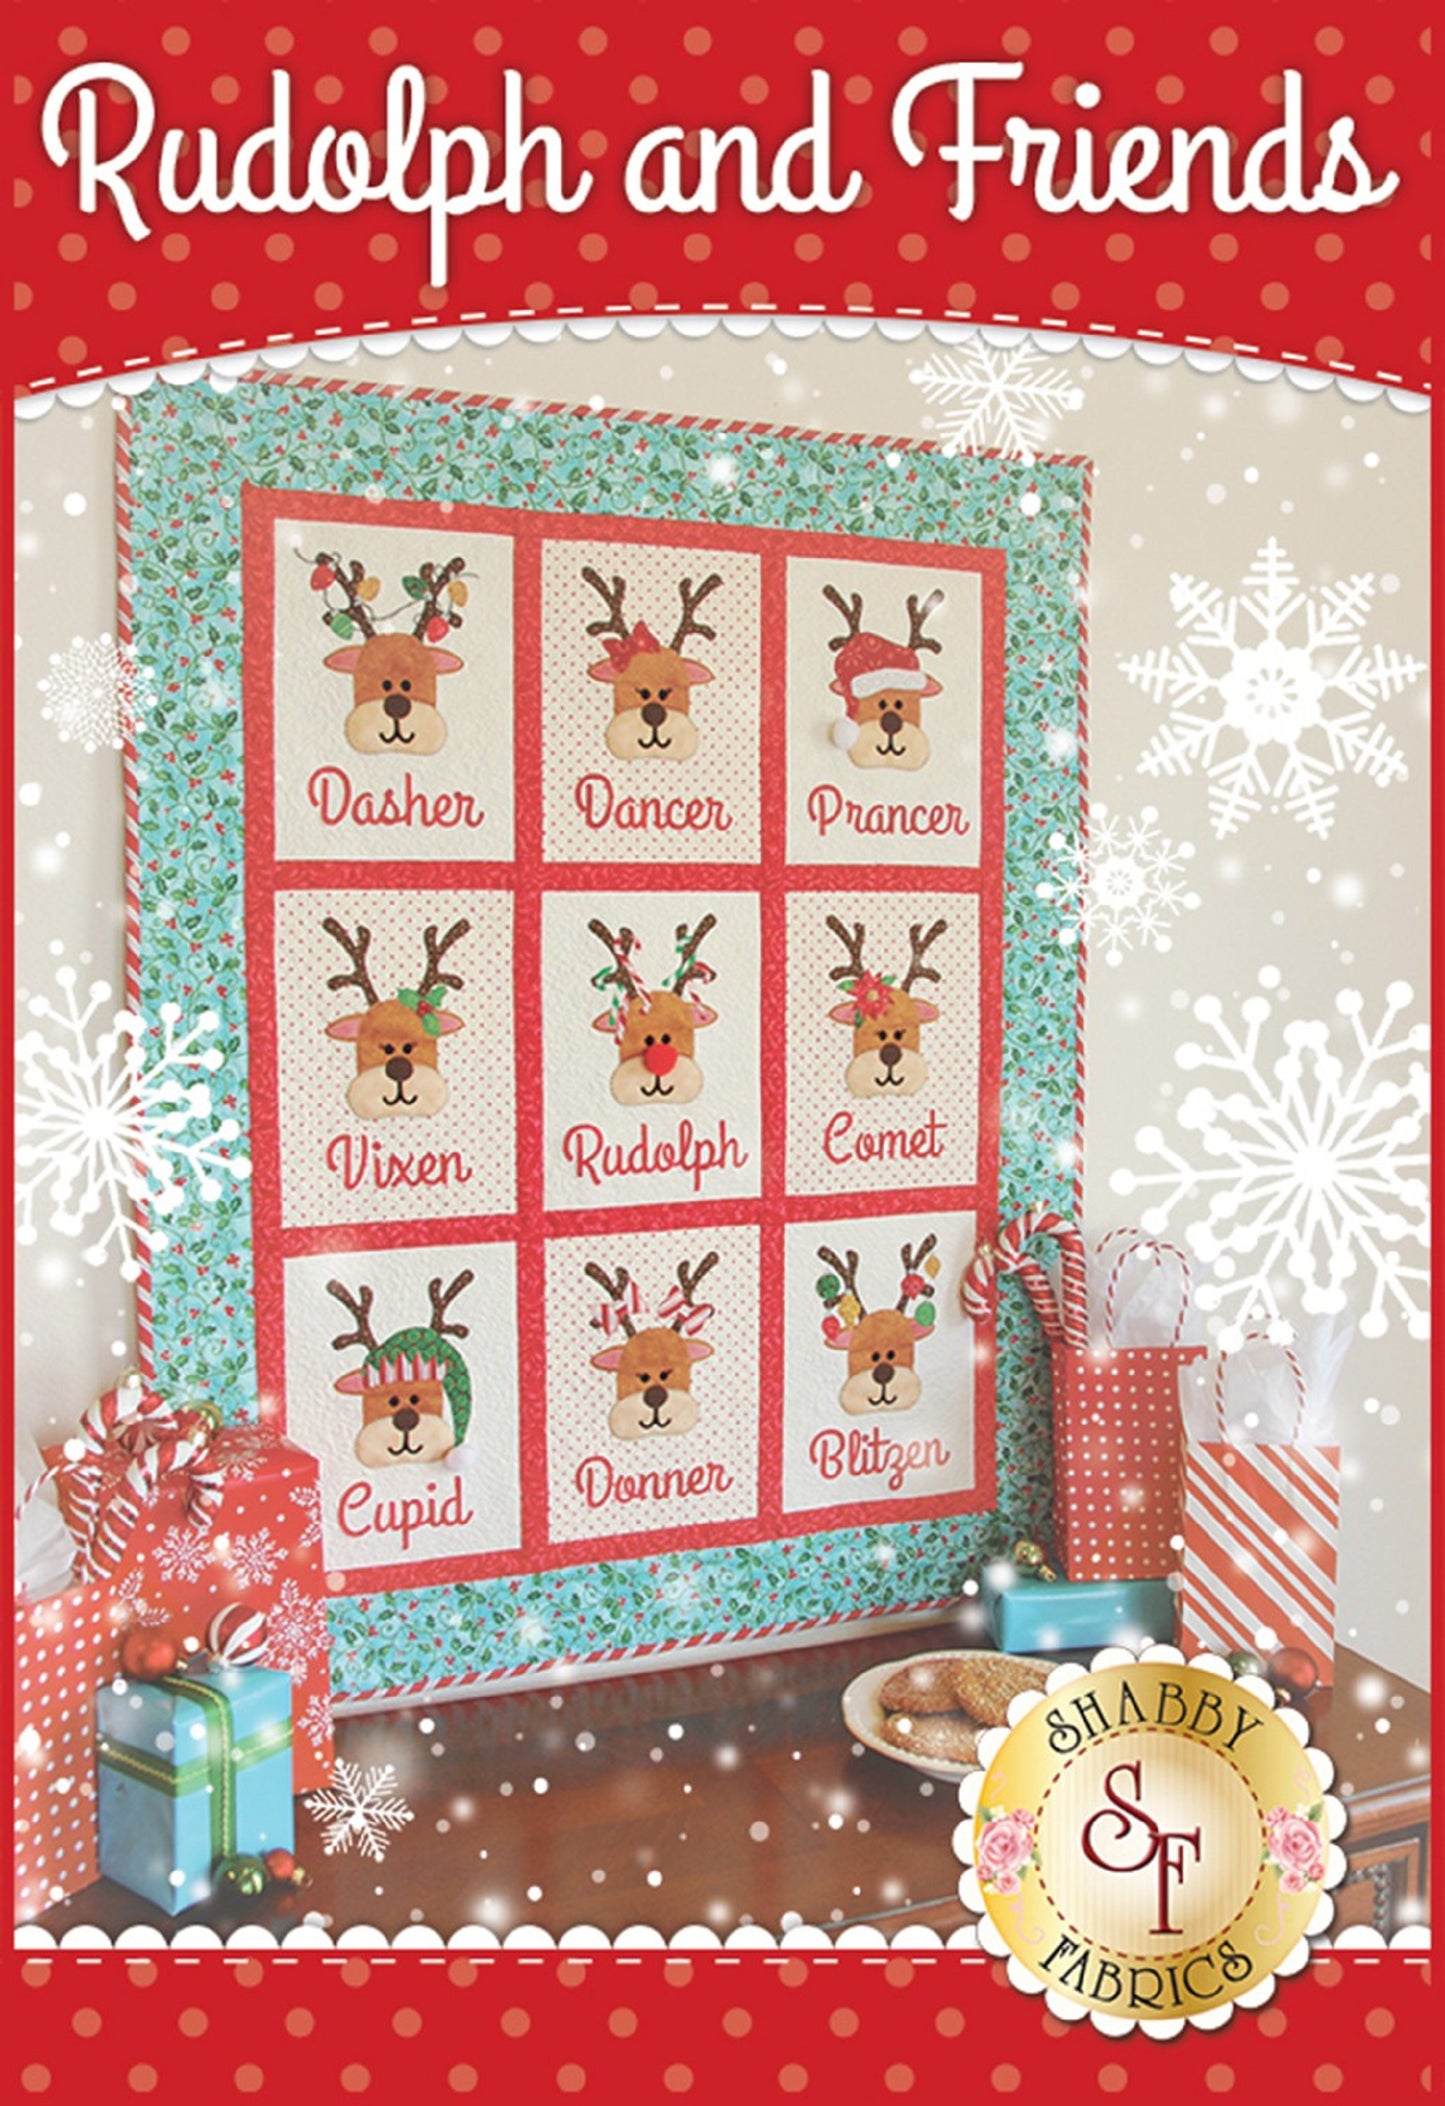 Rudolph and Friends Quilt Pattern by Shabby Fabrics